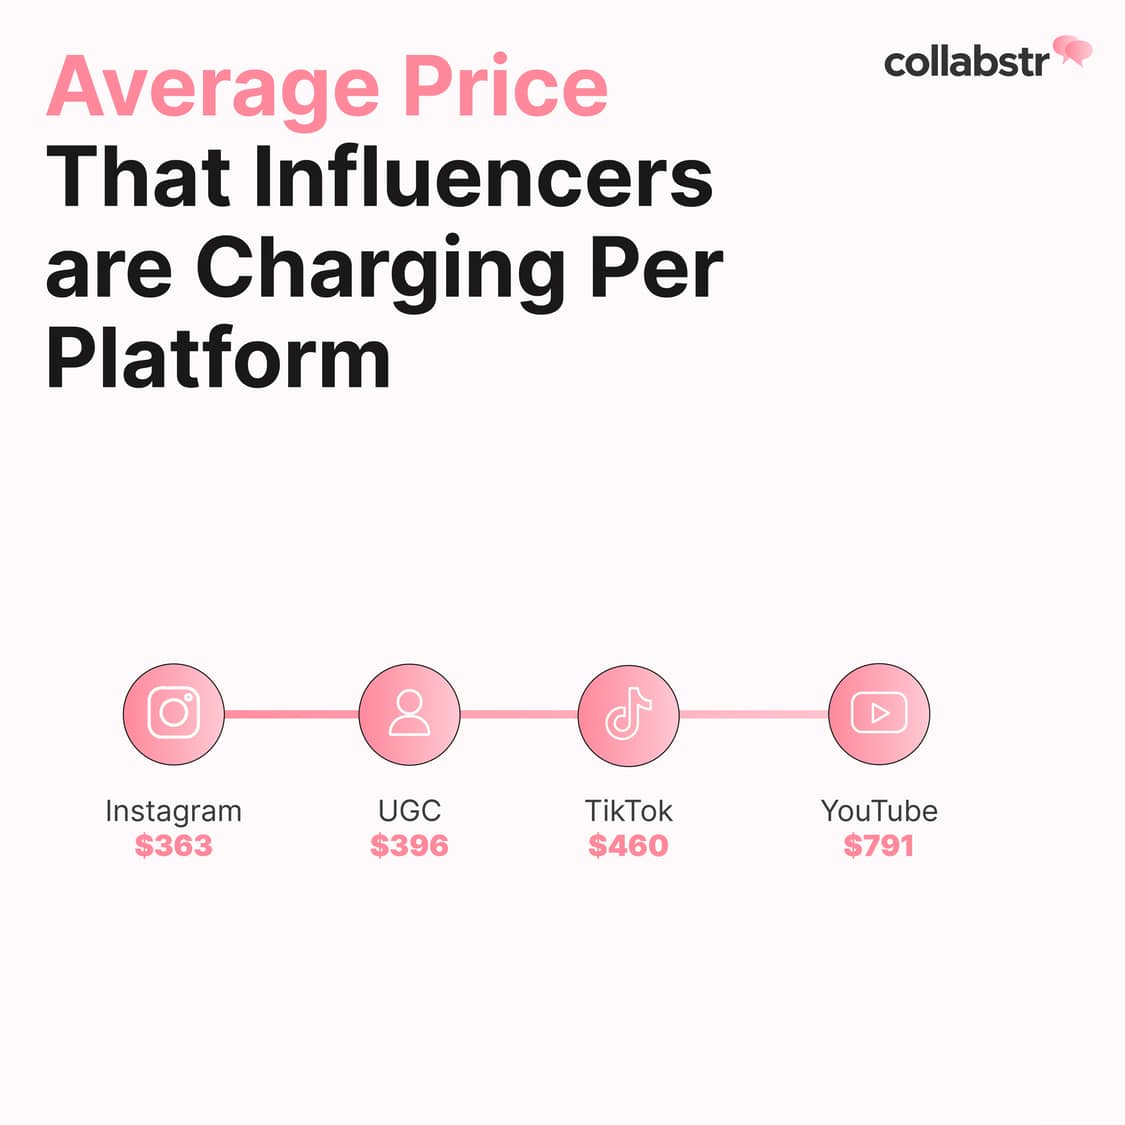 Average price that influencers charge on TikTok, Instagram, YouTube, and UGC.